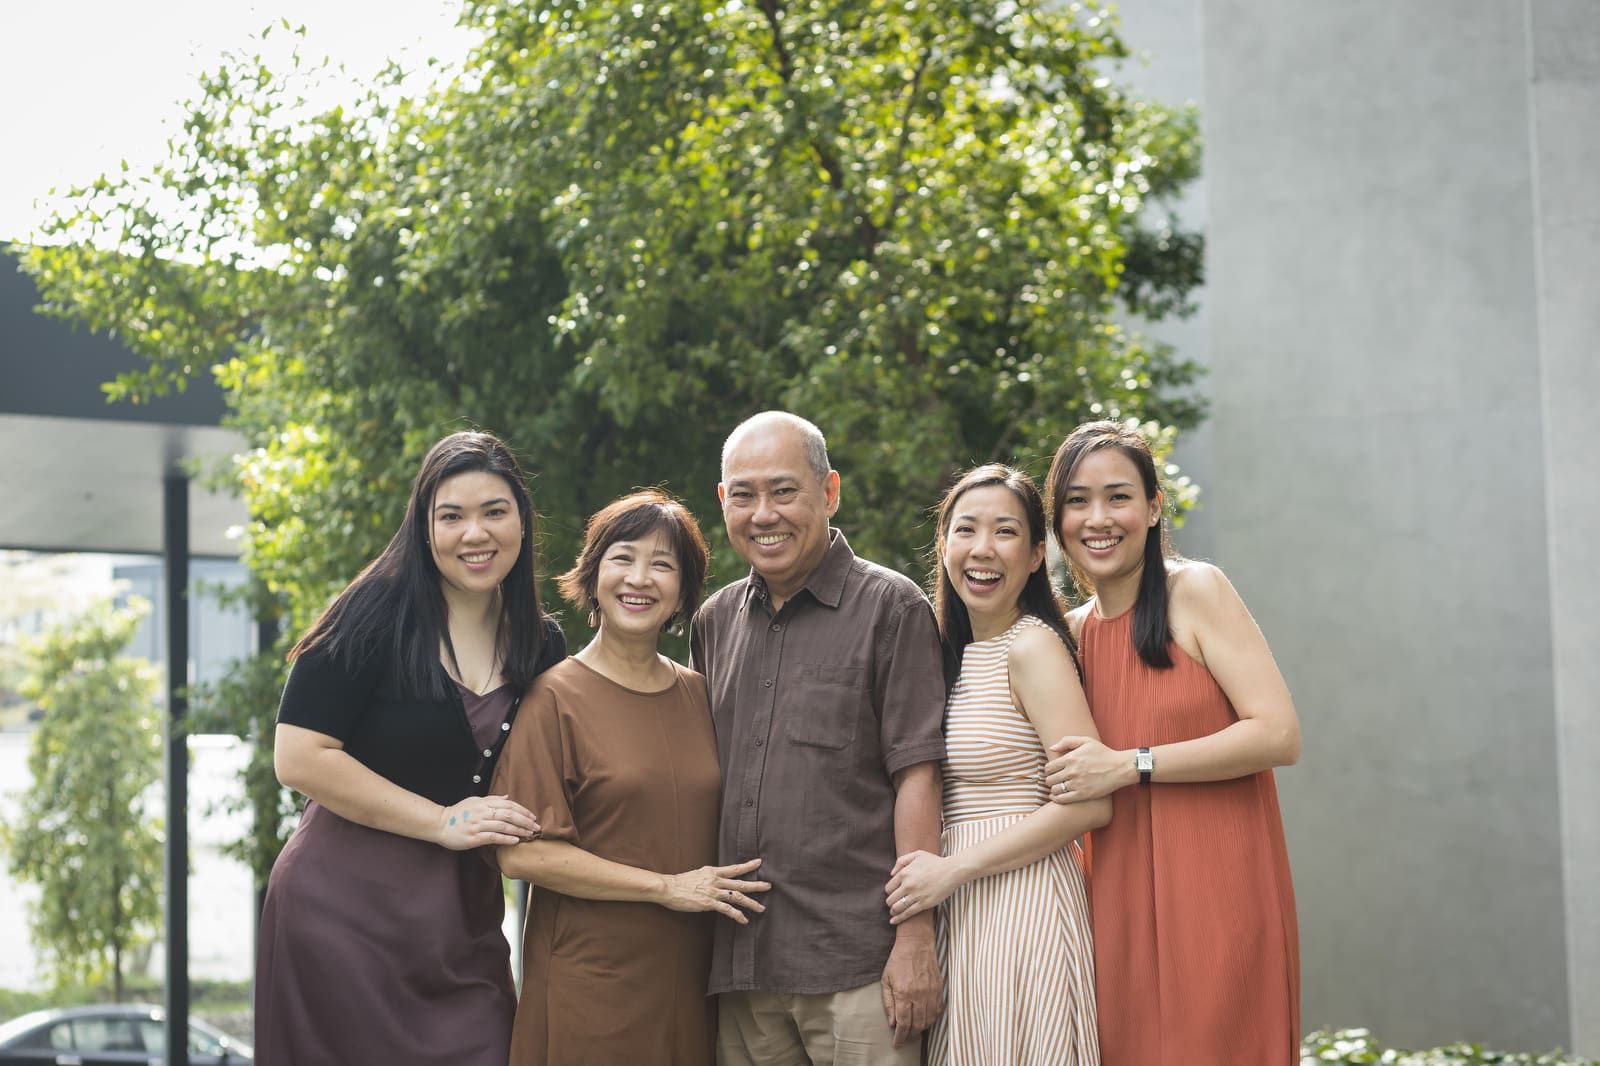 David and Serene with their three daughters and families. One of Reapfield’s core values is In family, we cherish and David seeks to live this out each day by treasuring the family God has blessed him with and building a meaningful family culture within Reapfield. All photos courtesy of David Ong.